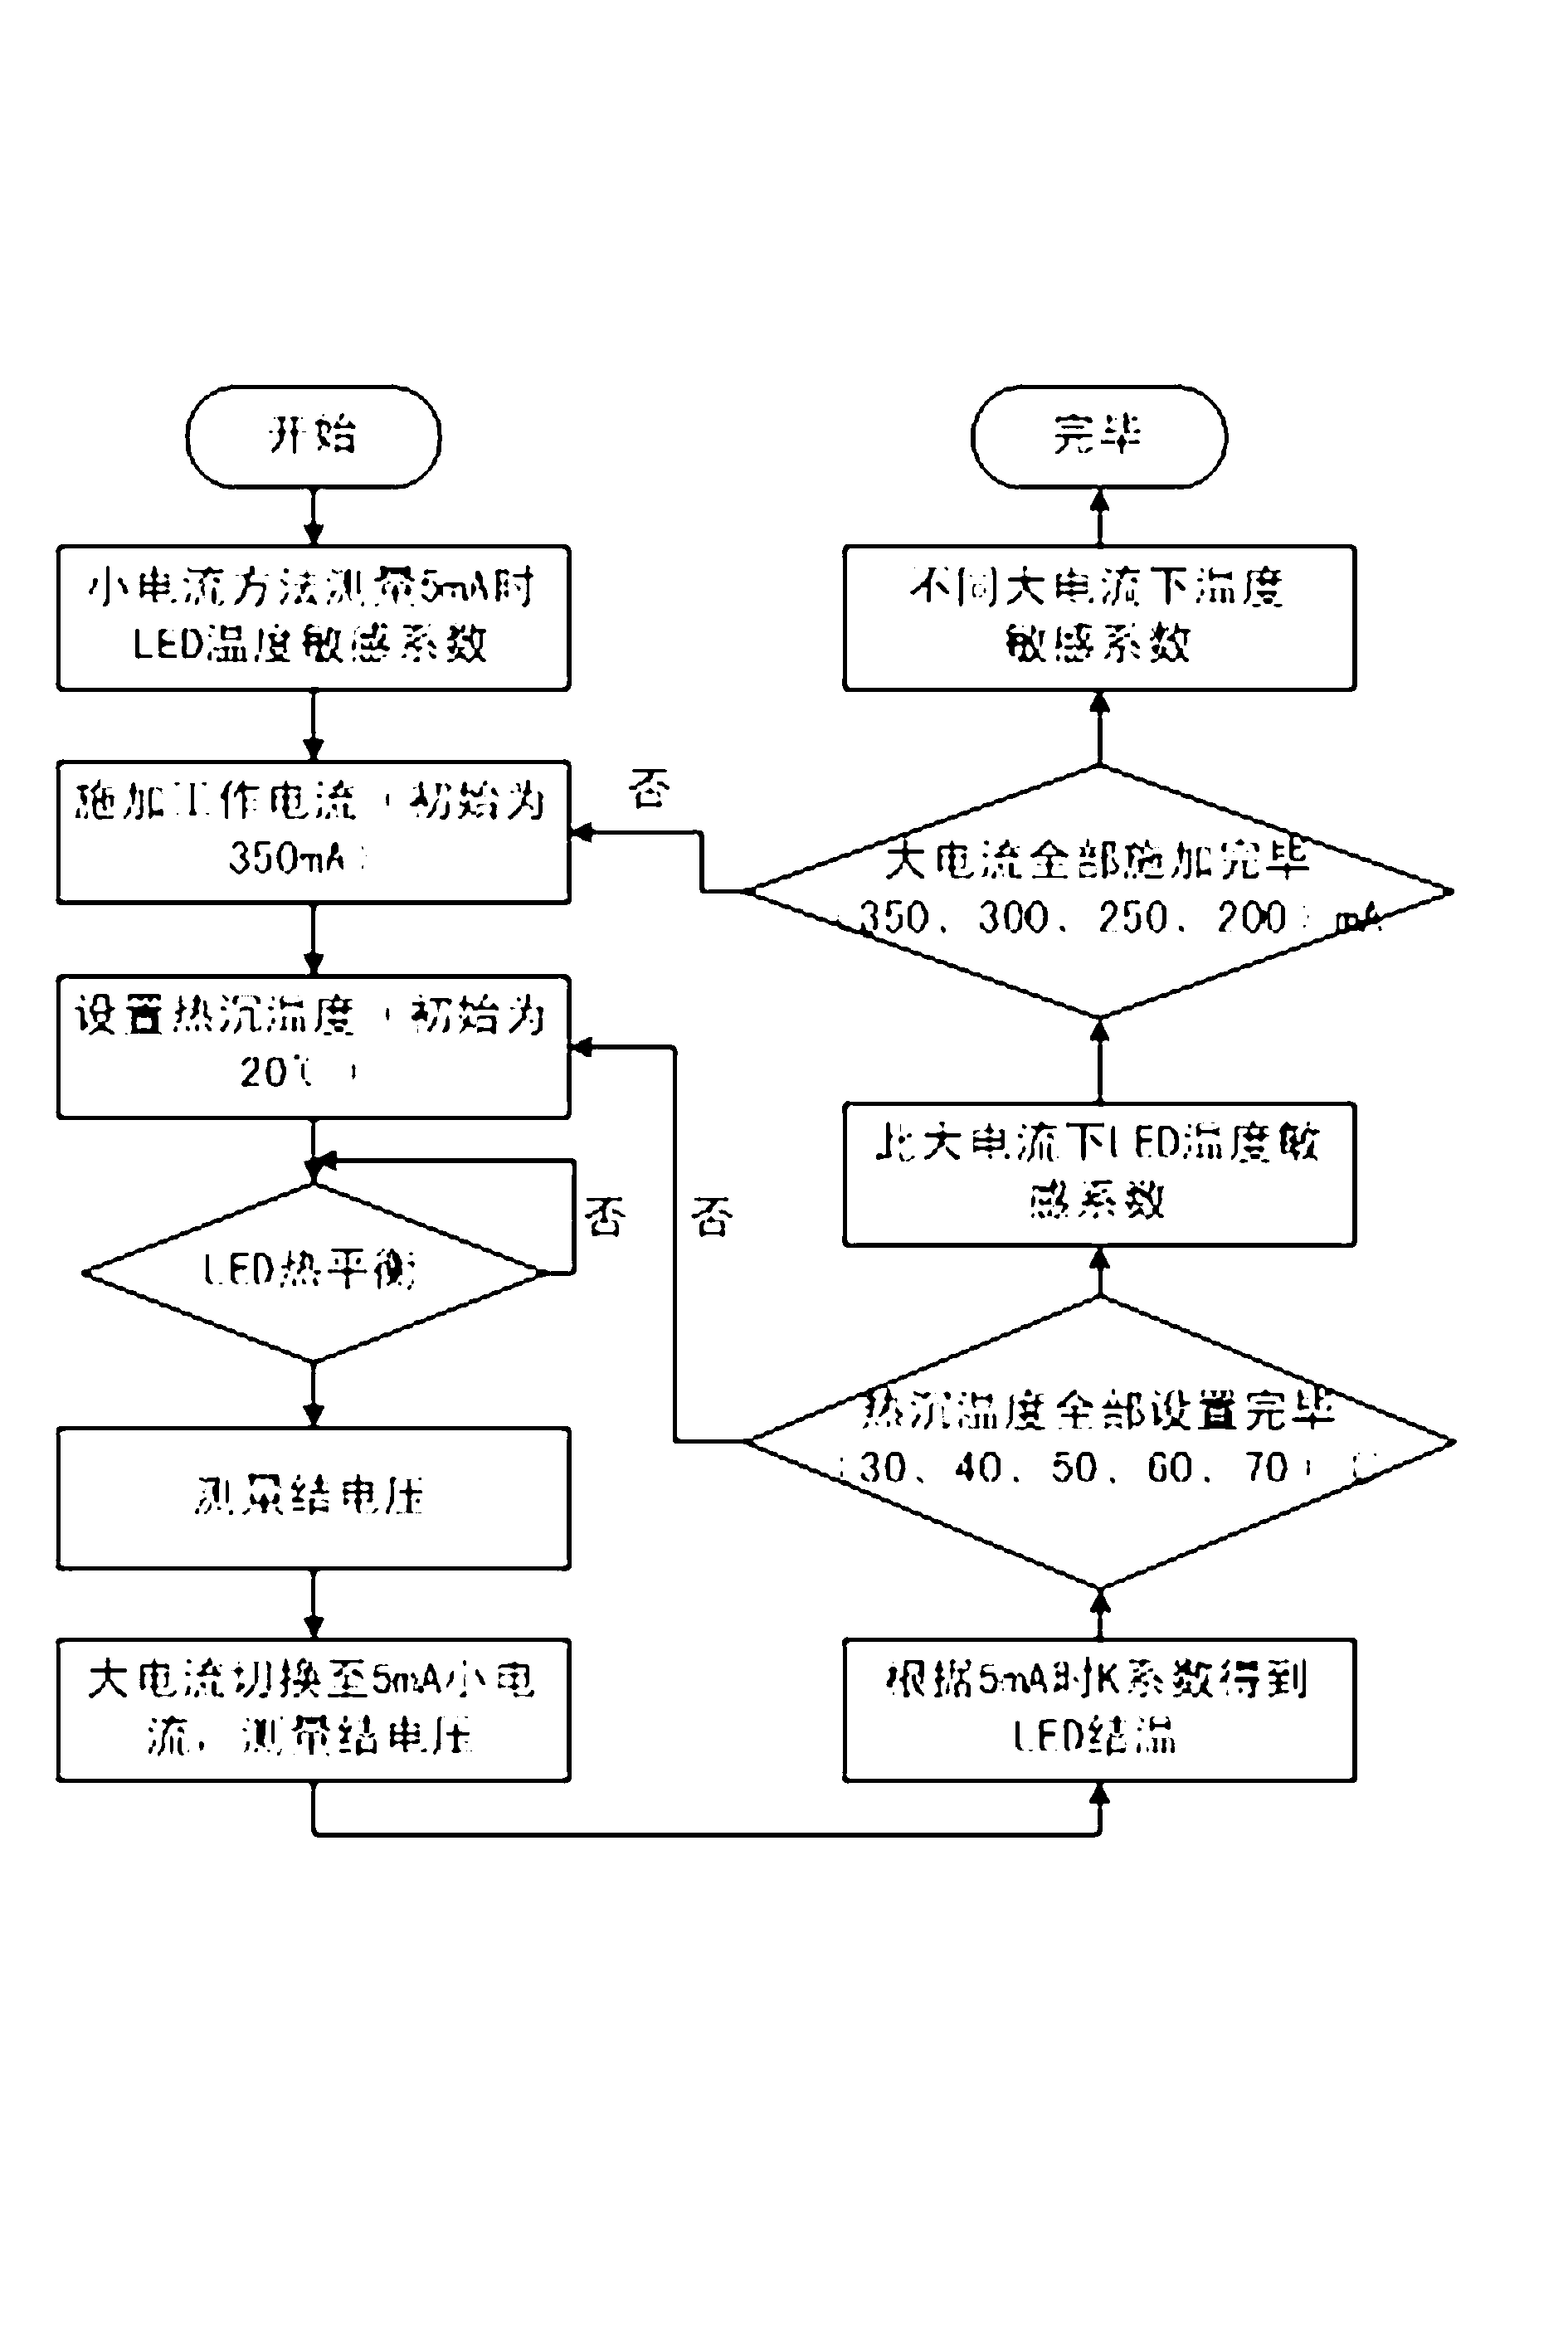 Non-contact high-power light-emitting diode (LED) junction temperature test method